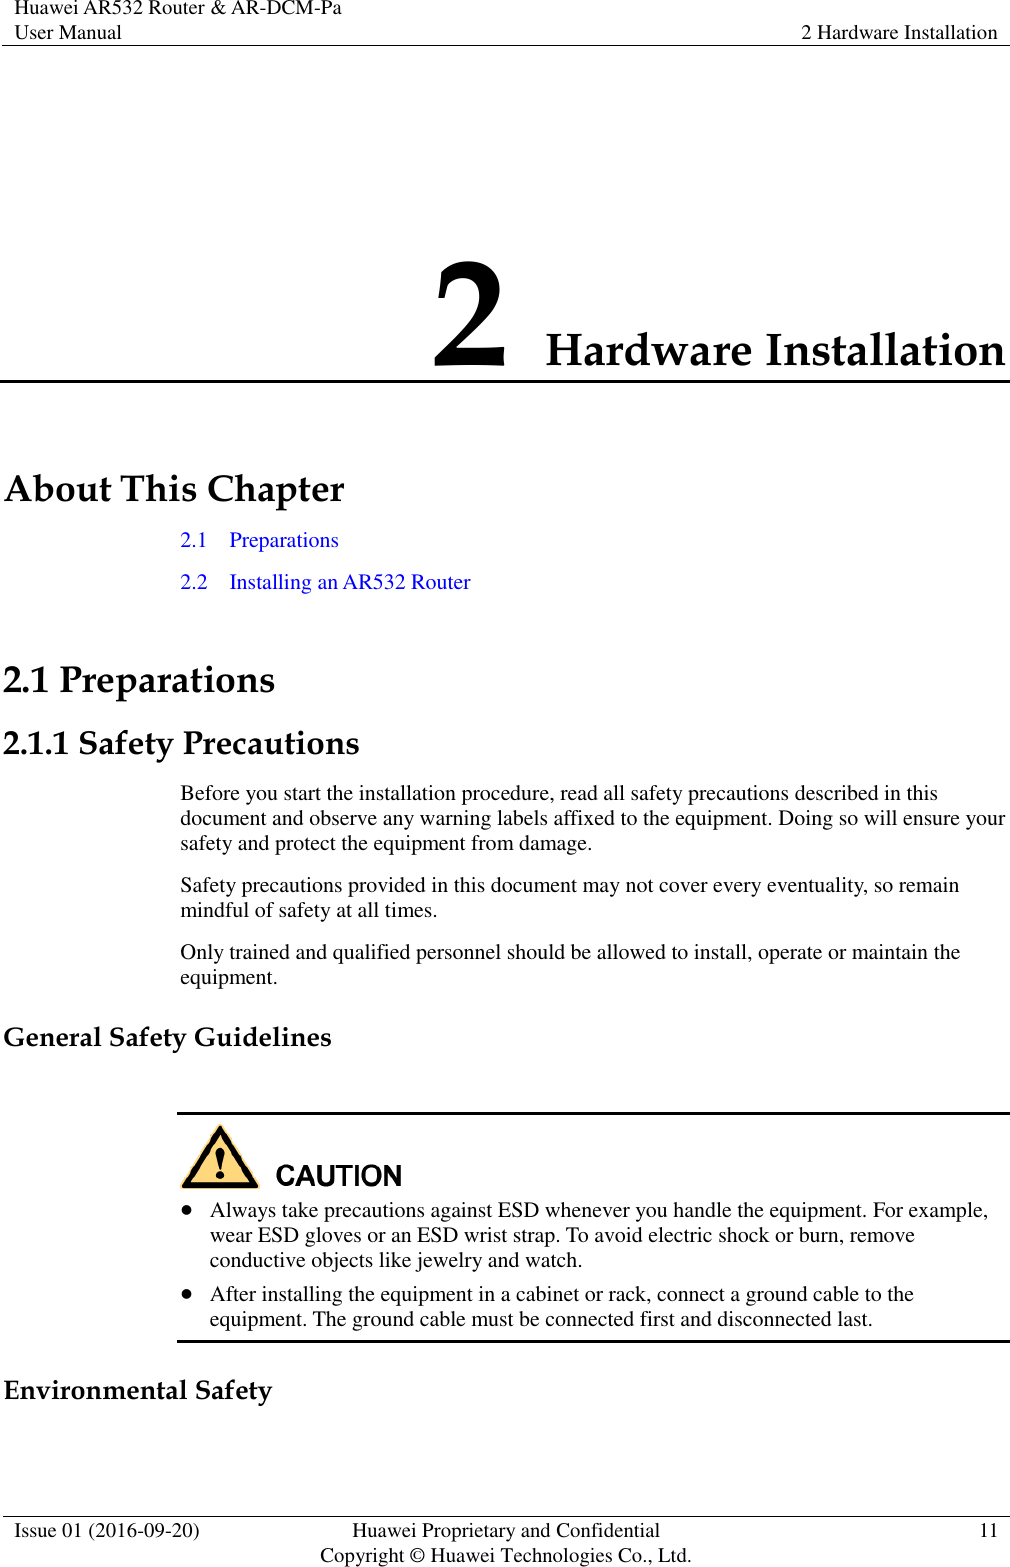 Huawei AR532 Router &amp; AR-DCM-Pa User Manual 2 Hardware Installation  Issue 01 (2016-09-20) Huawei Proprietary and Confidential                                     Copyright © Huawei Technologies Co., Ltd. 11  2 Hardware Installation About This Chapter 2.1    Preparations 2.2    Installing an AR532 Router 2.1 Preparations 2.1.1 Safety Precautions Before you start the installation procedure, read all safety precautions described in this document and observe any warning labels affixed to the equipment. Doing so will ensure your safety and protect the equipment from damage. Safety precautions provided in this document may not cover every eventuality, so remain mindful of safety at all times. Only trained and qualified personnel should be allowed to install, operate or maintain the equipment. General Safety Guidelines    Always take precautions against ESD whenever you handle the equipment. For example, wear ESD gloves or an ESD wrist strap. To avoid electric shock or burn, remove conductive objects like jewelry and watch.  After installing the equipment in a cabinet or rack, connect a ground cable to the equipment. The ground cable must be connected first and disconnected last. Environmental Safety  